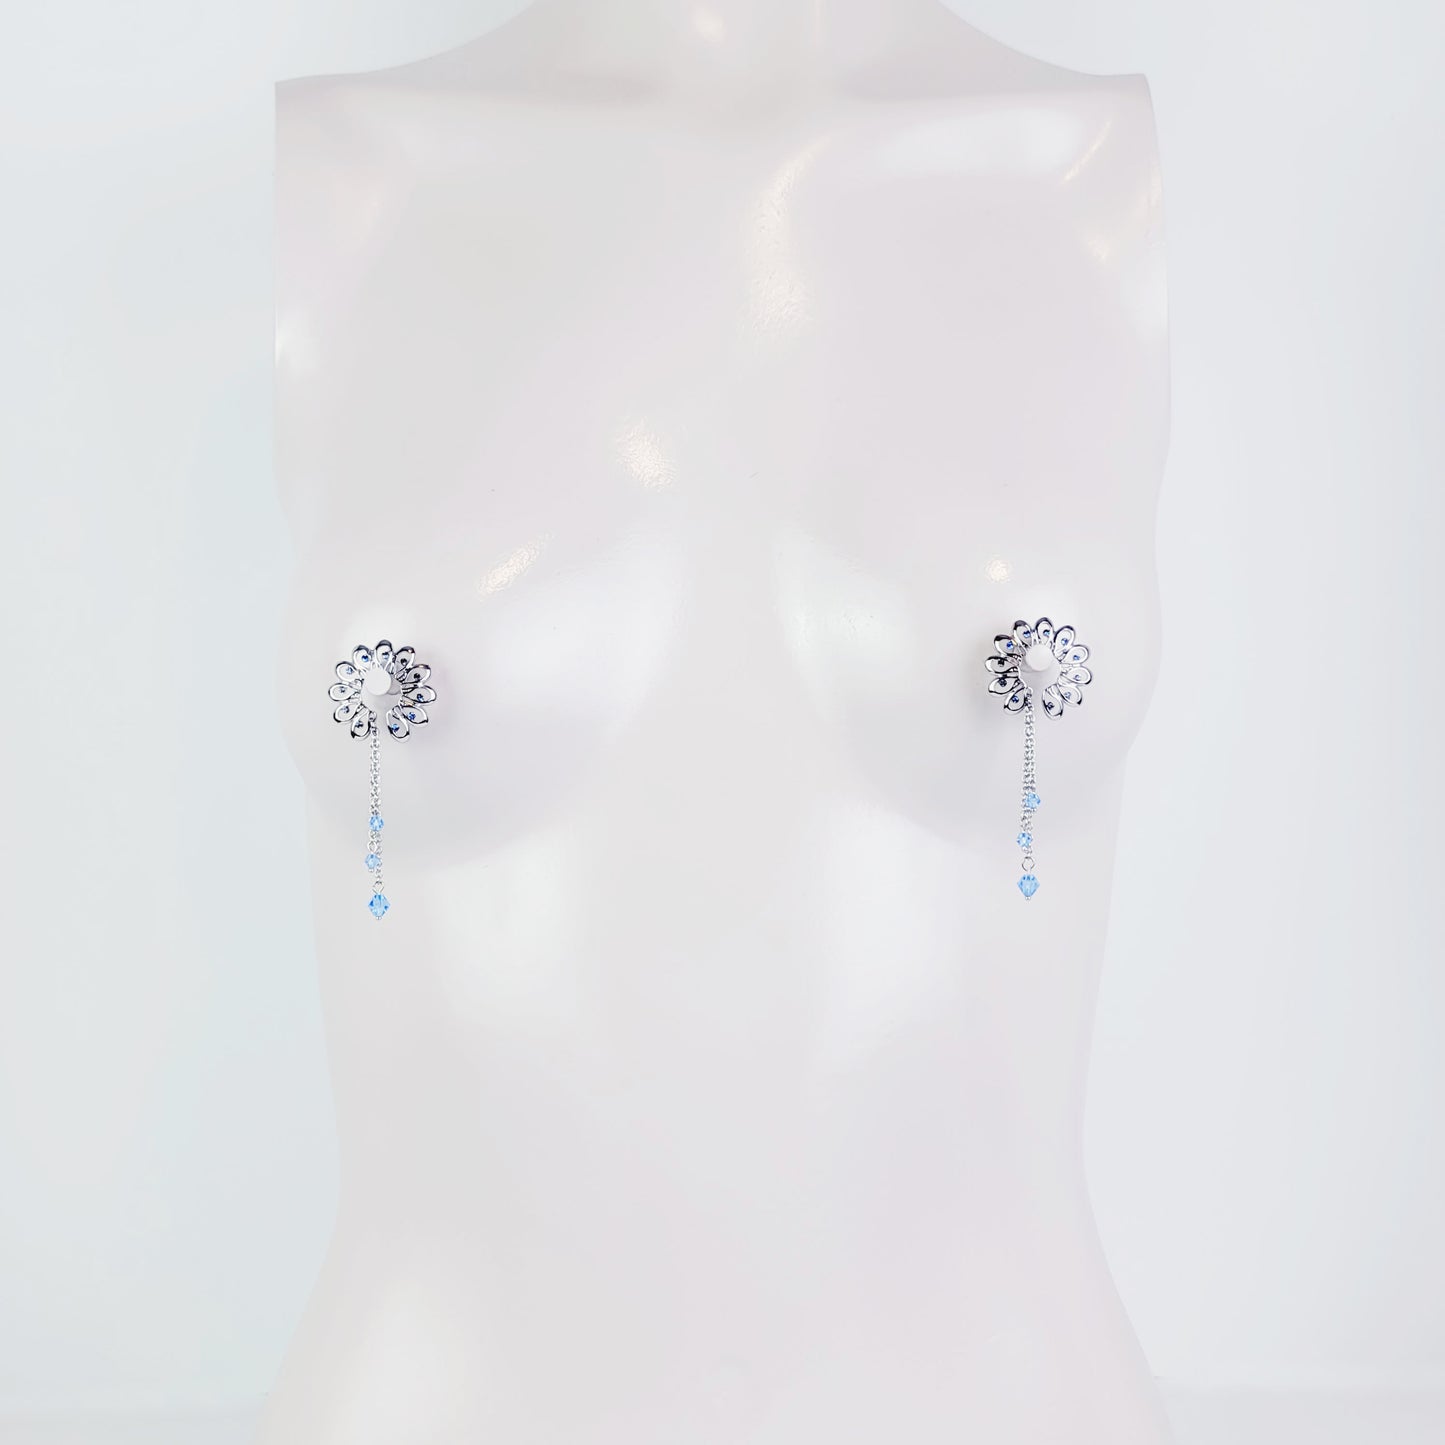 Nipple Shields with Blue Crystals and chain Dangles, Non Piercing Nipple Rings. MATURE, BDSM, Erotic Body Jewelry for Women